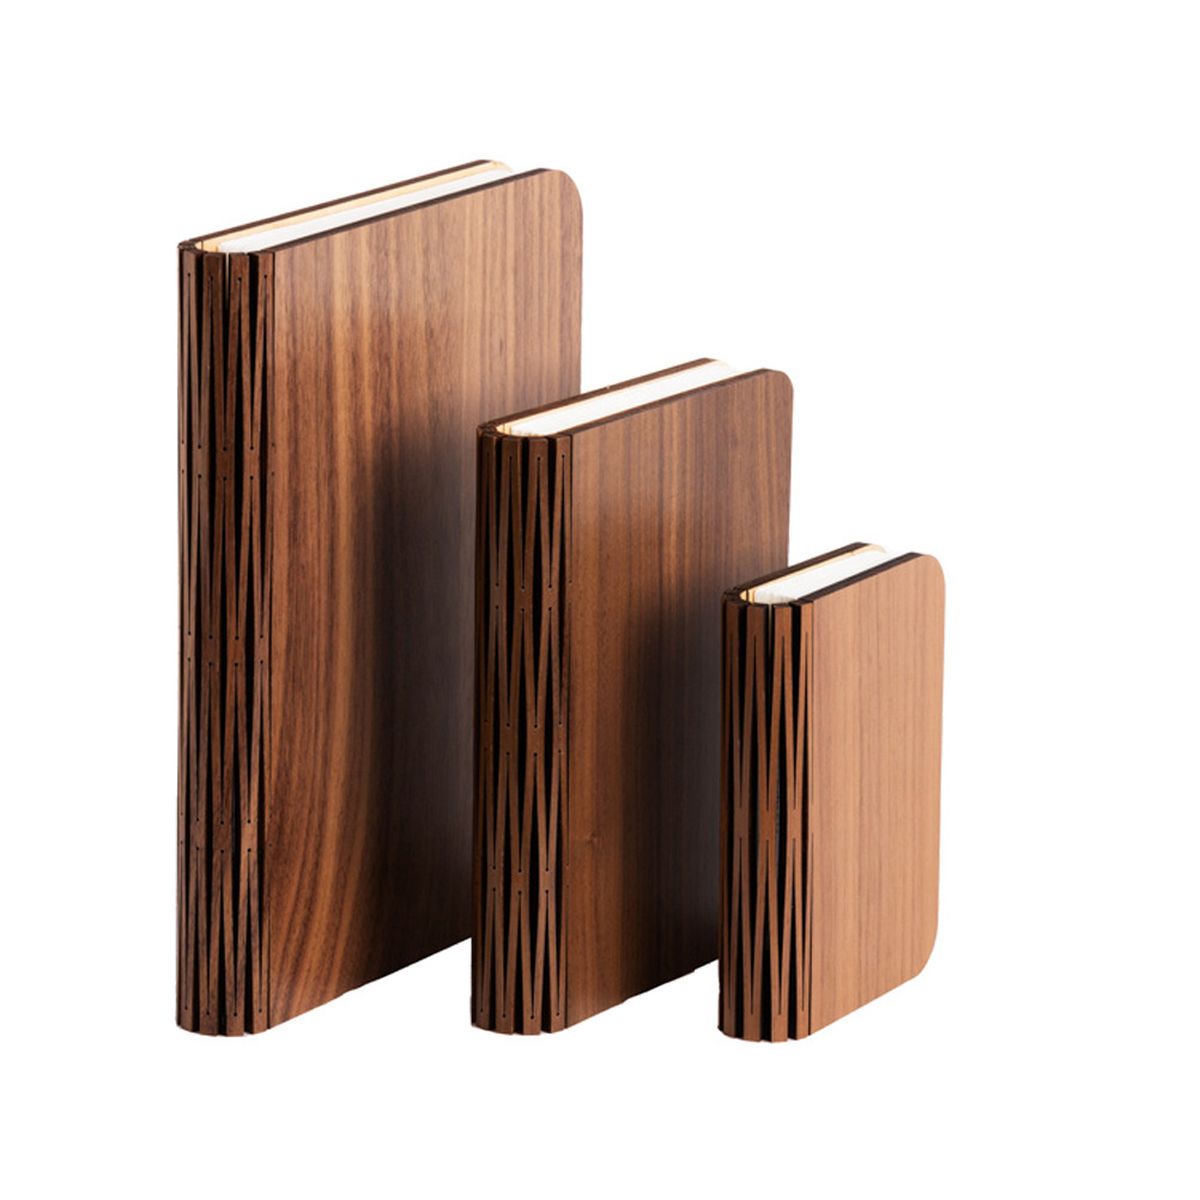 Book lamp in real wood - color Walnut - Size S